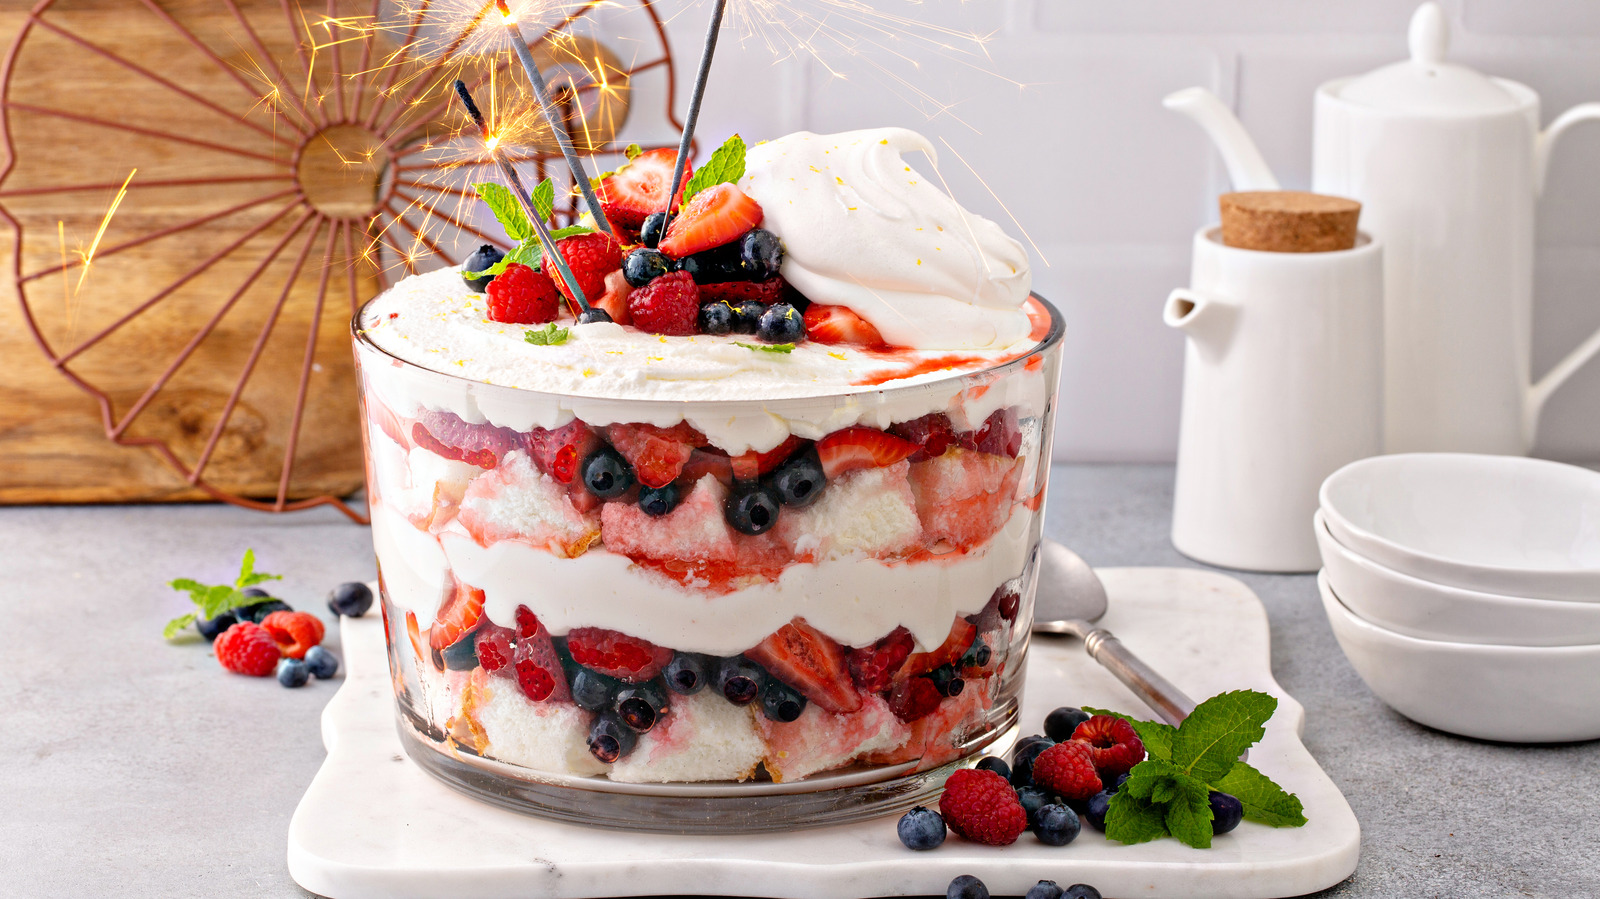 https://www.thedailymeal.com/img/gallery/if-your-cake-is-impossibly-stuck-to-the-pan-just-turn-it-into-trifle/l-intro-1682542289.jpg